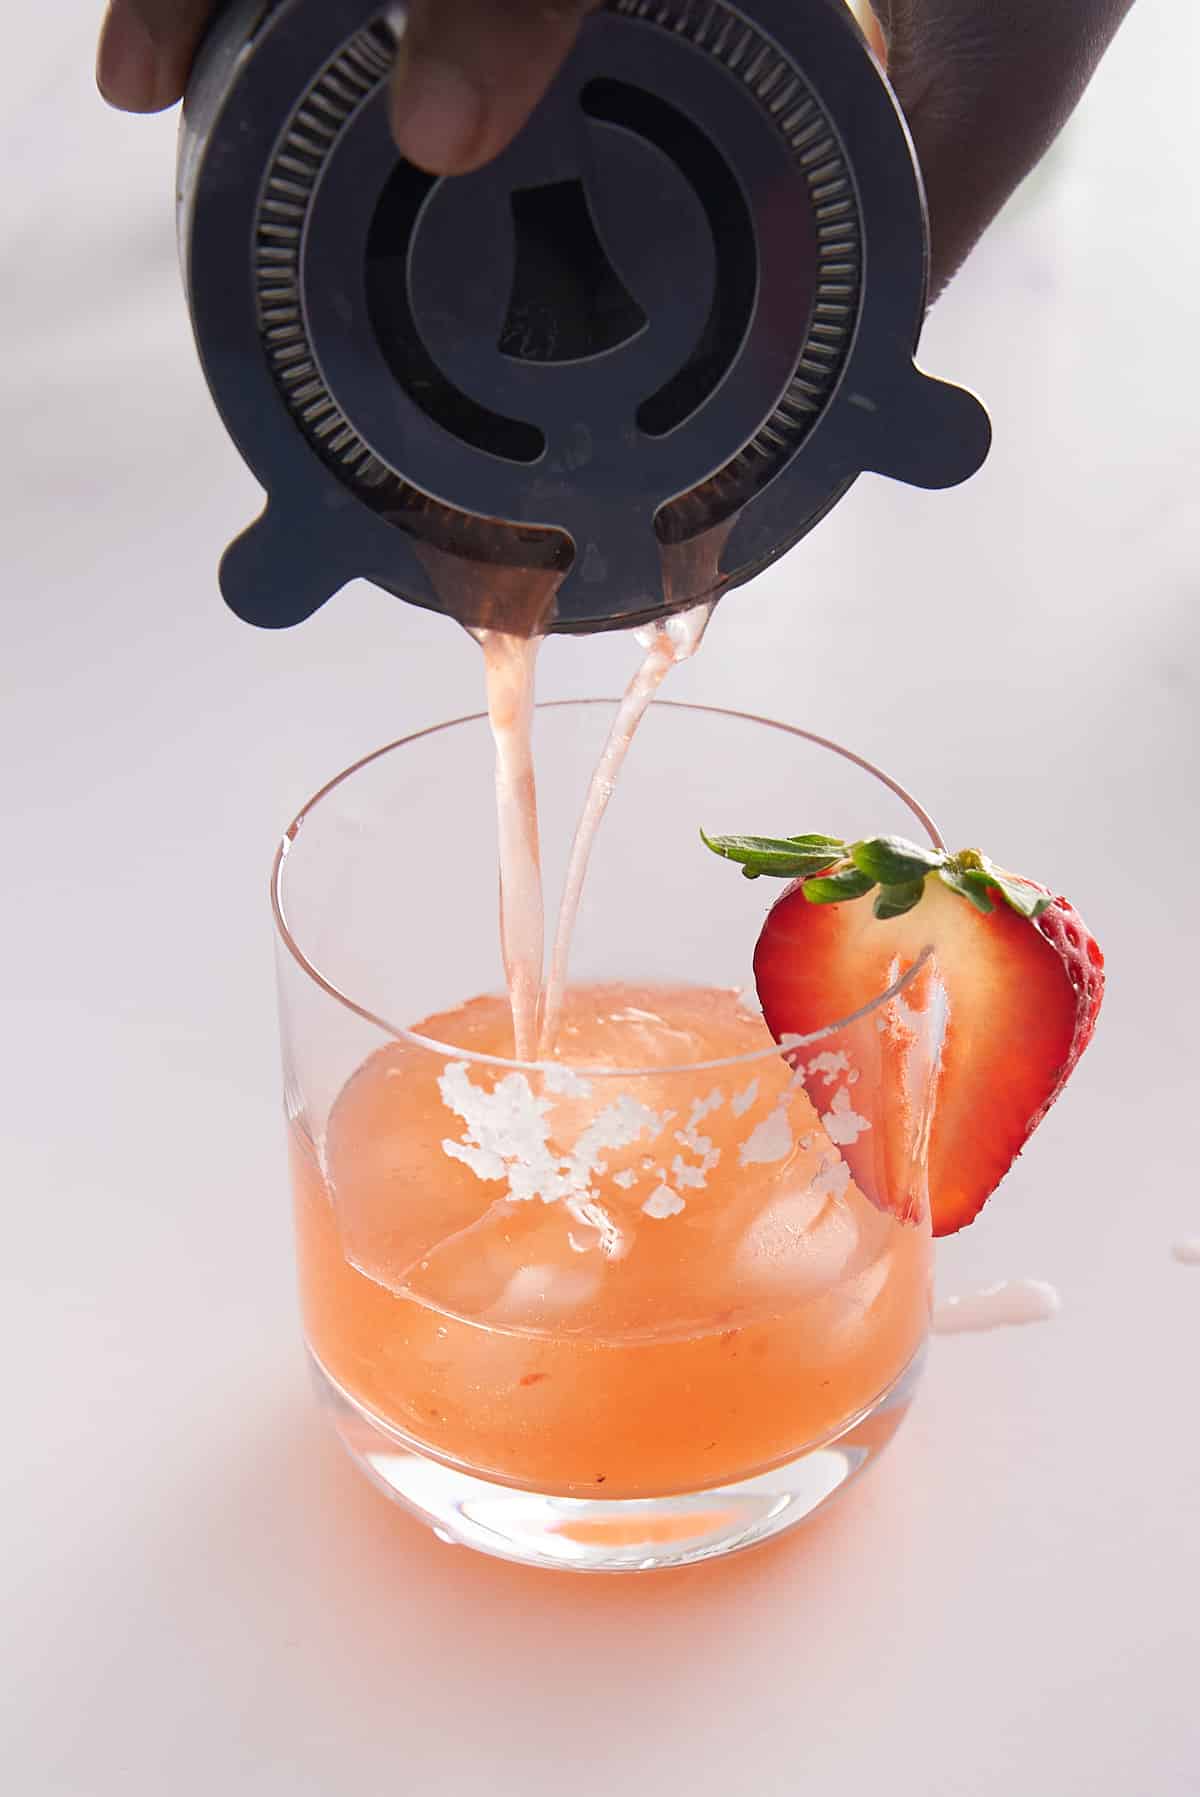 Strawberry basil margarita cocktail being poured from a cocktail shaker into a glass filled with icecubes.